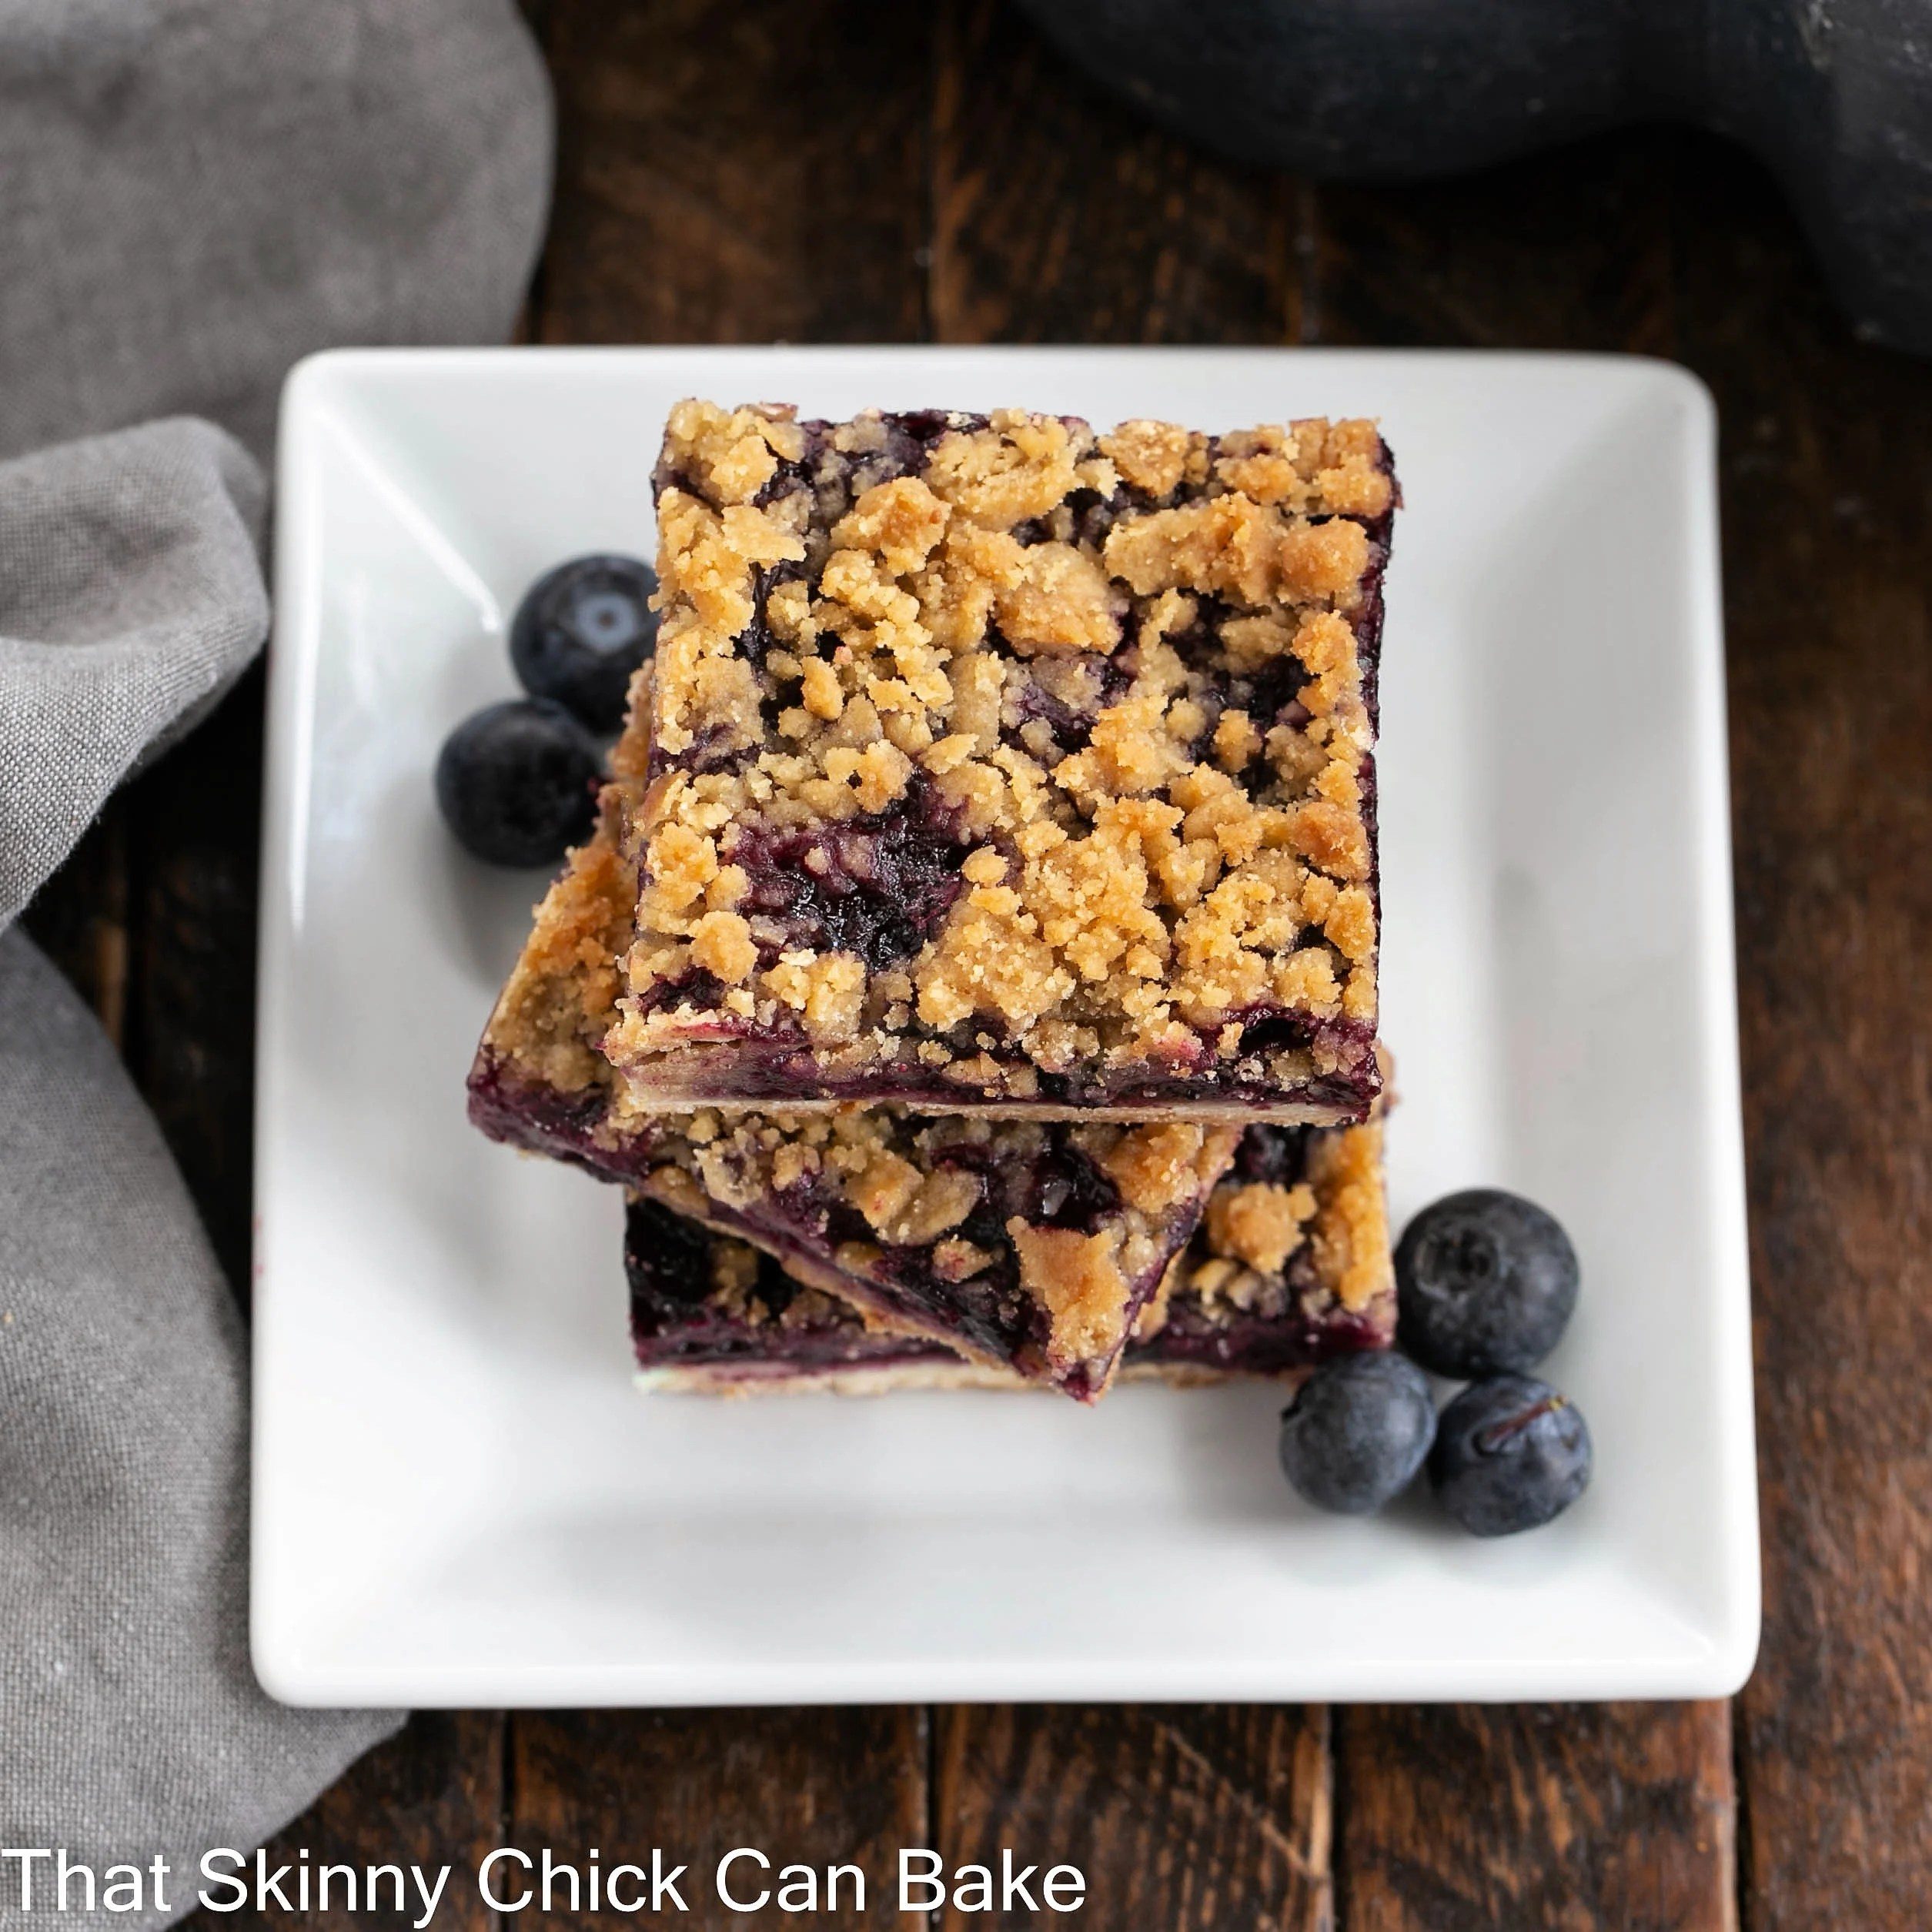 Blueberry Streusel Bars - Easier than Pie! - That Skinny Chick Can Bake